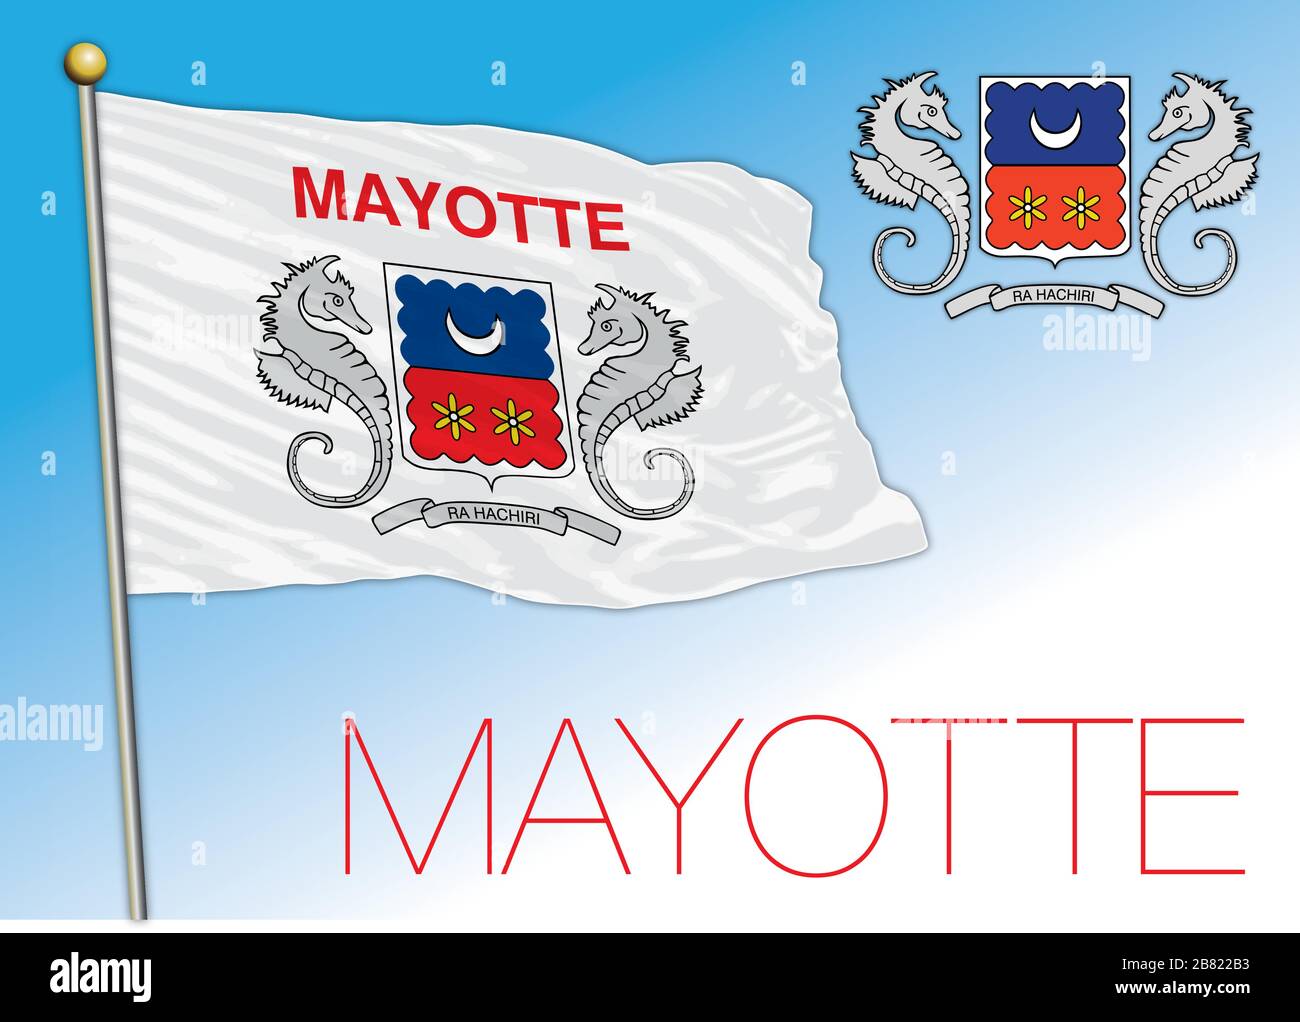 Mayotte official national flag and coat of arms, French territory, Africa, vector illustration Stock Vector